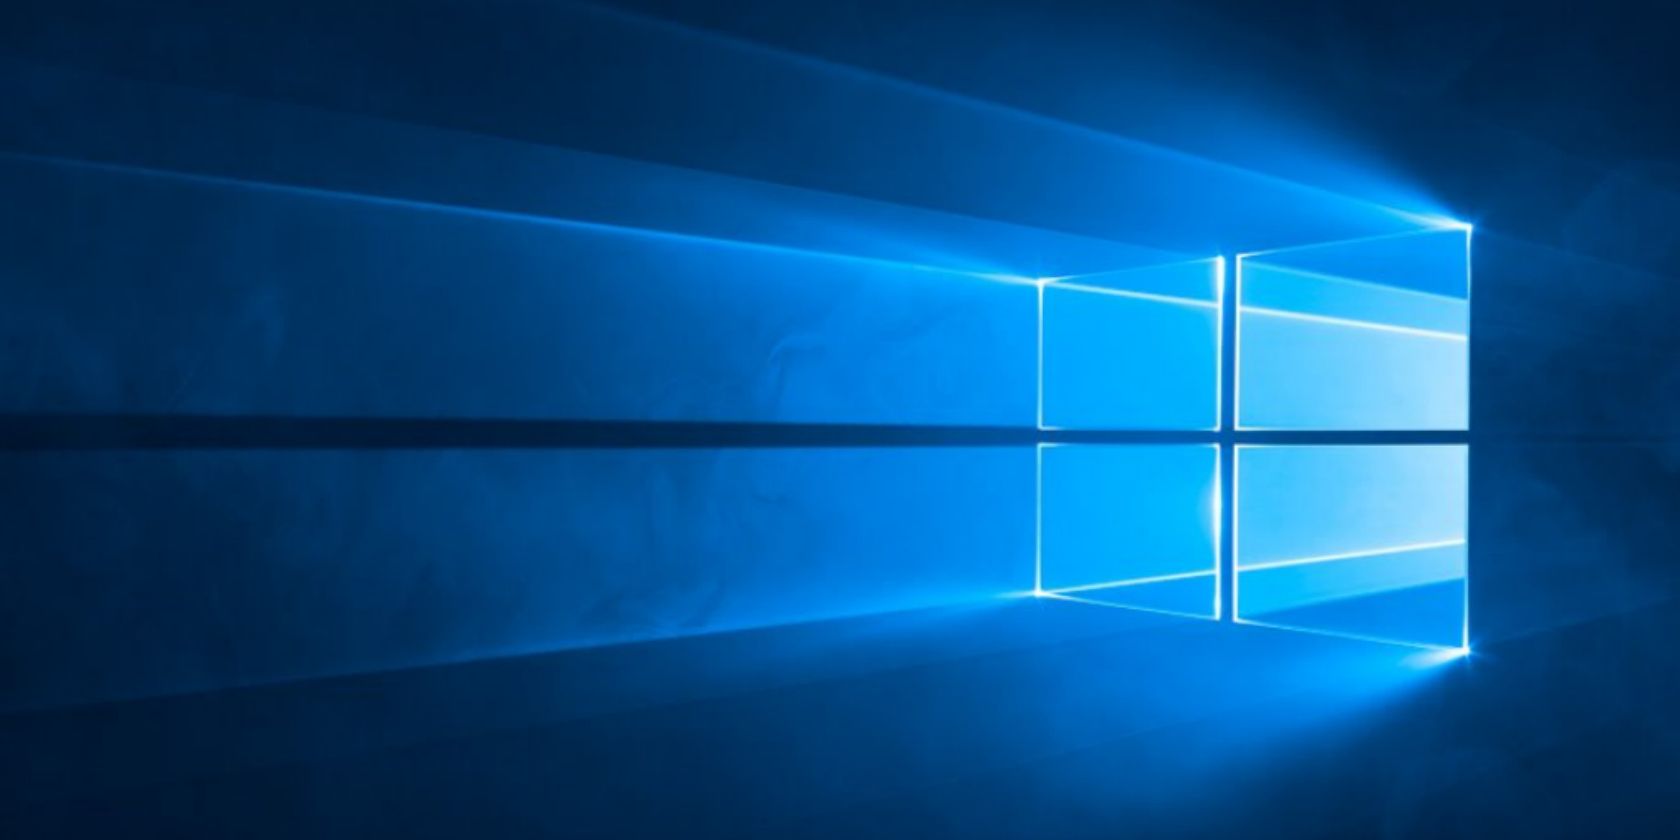 Can I set a GIF as my wallpaper Windows 10?